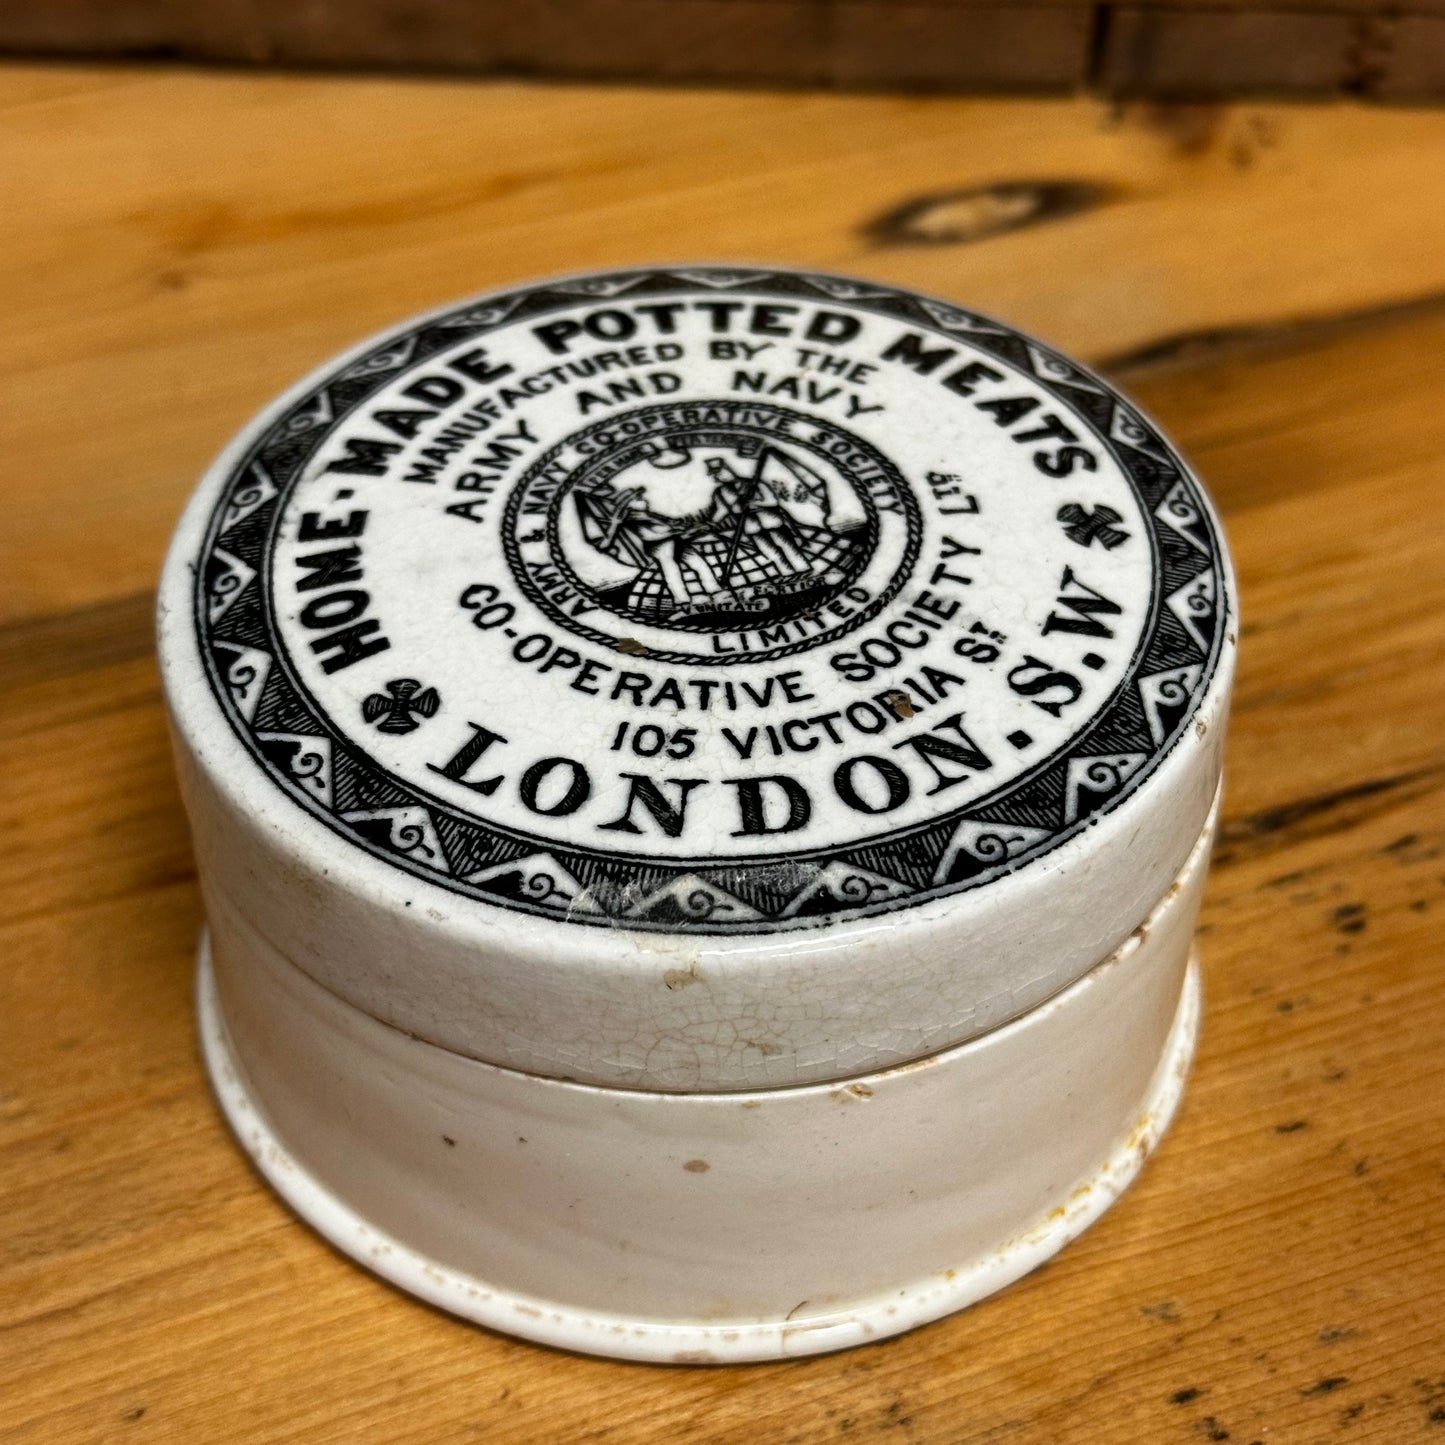 Army & Navy Potted Meat Pot and Lid English Advertising London